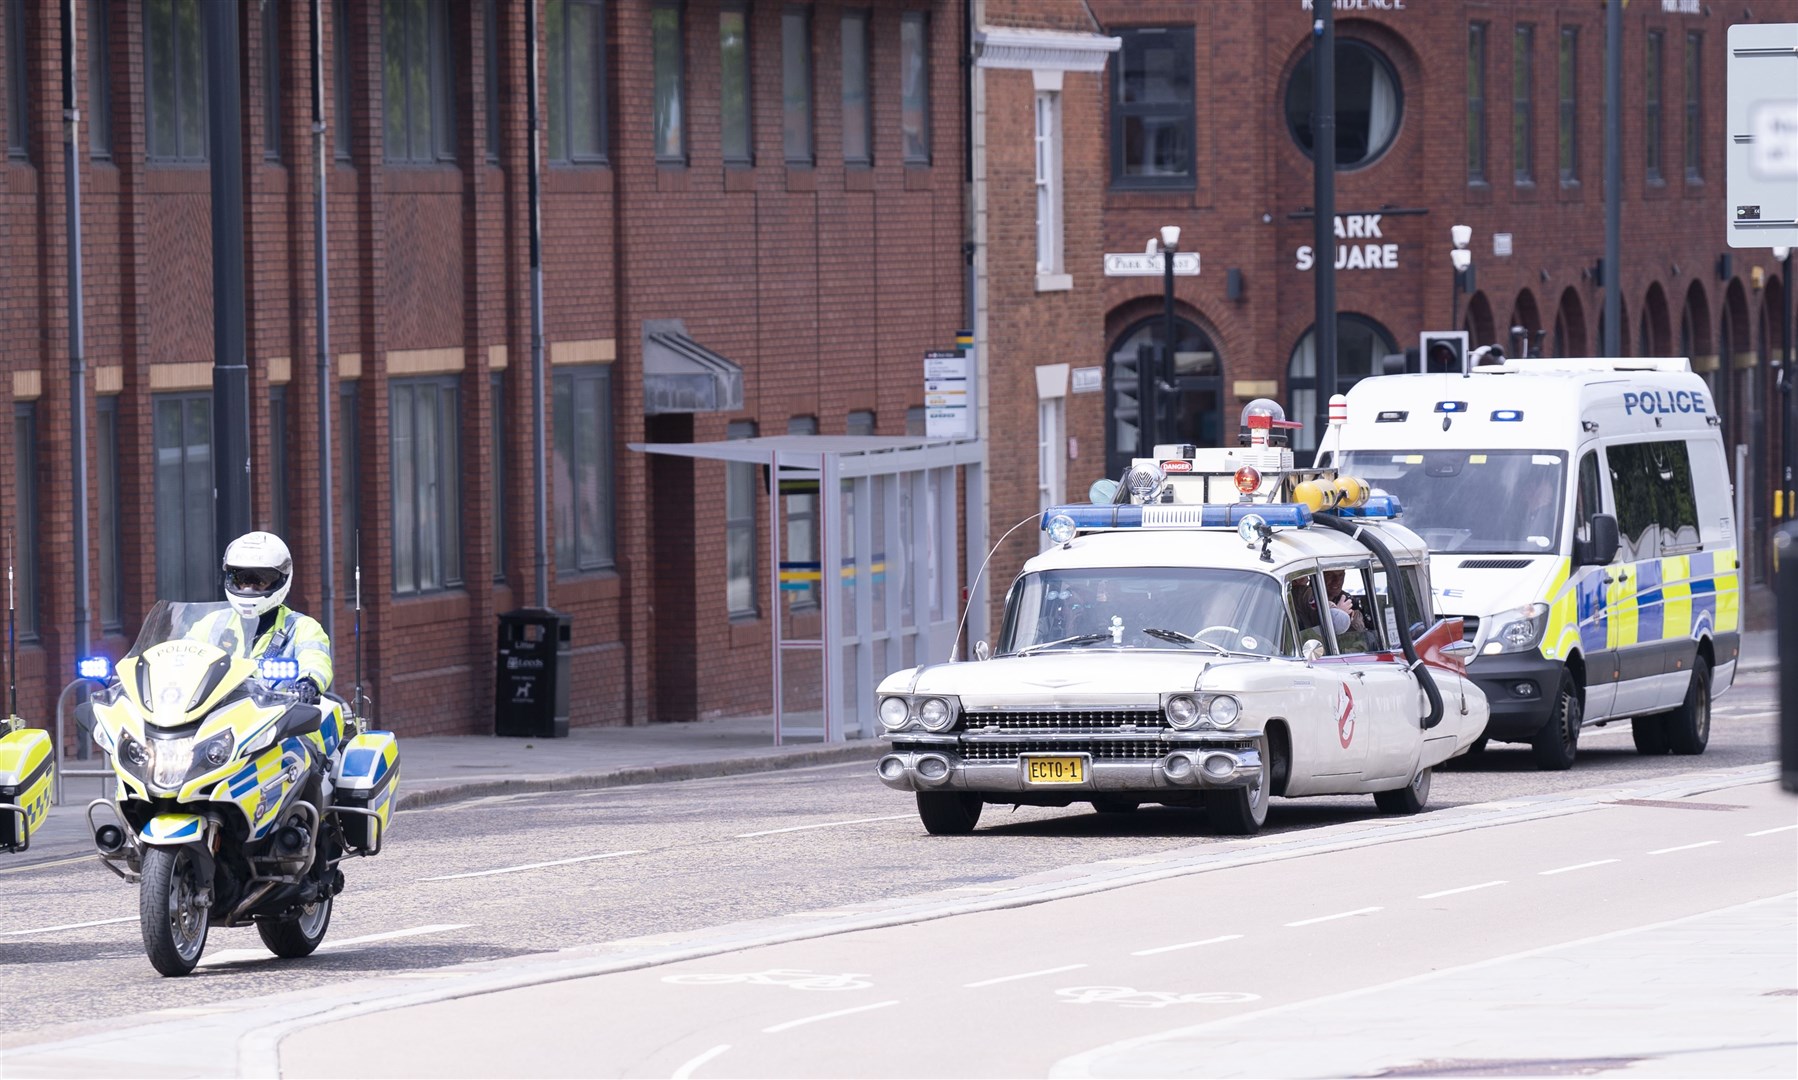 Police escort the Ghostbusters vehicle Ecto-1 (Danny Lawson/PA)